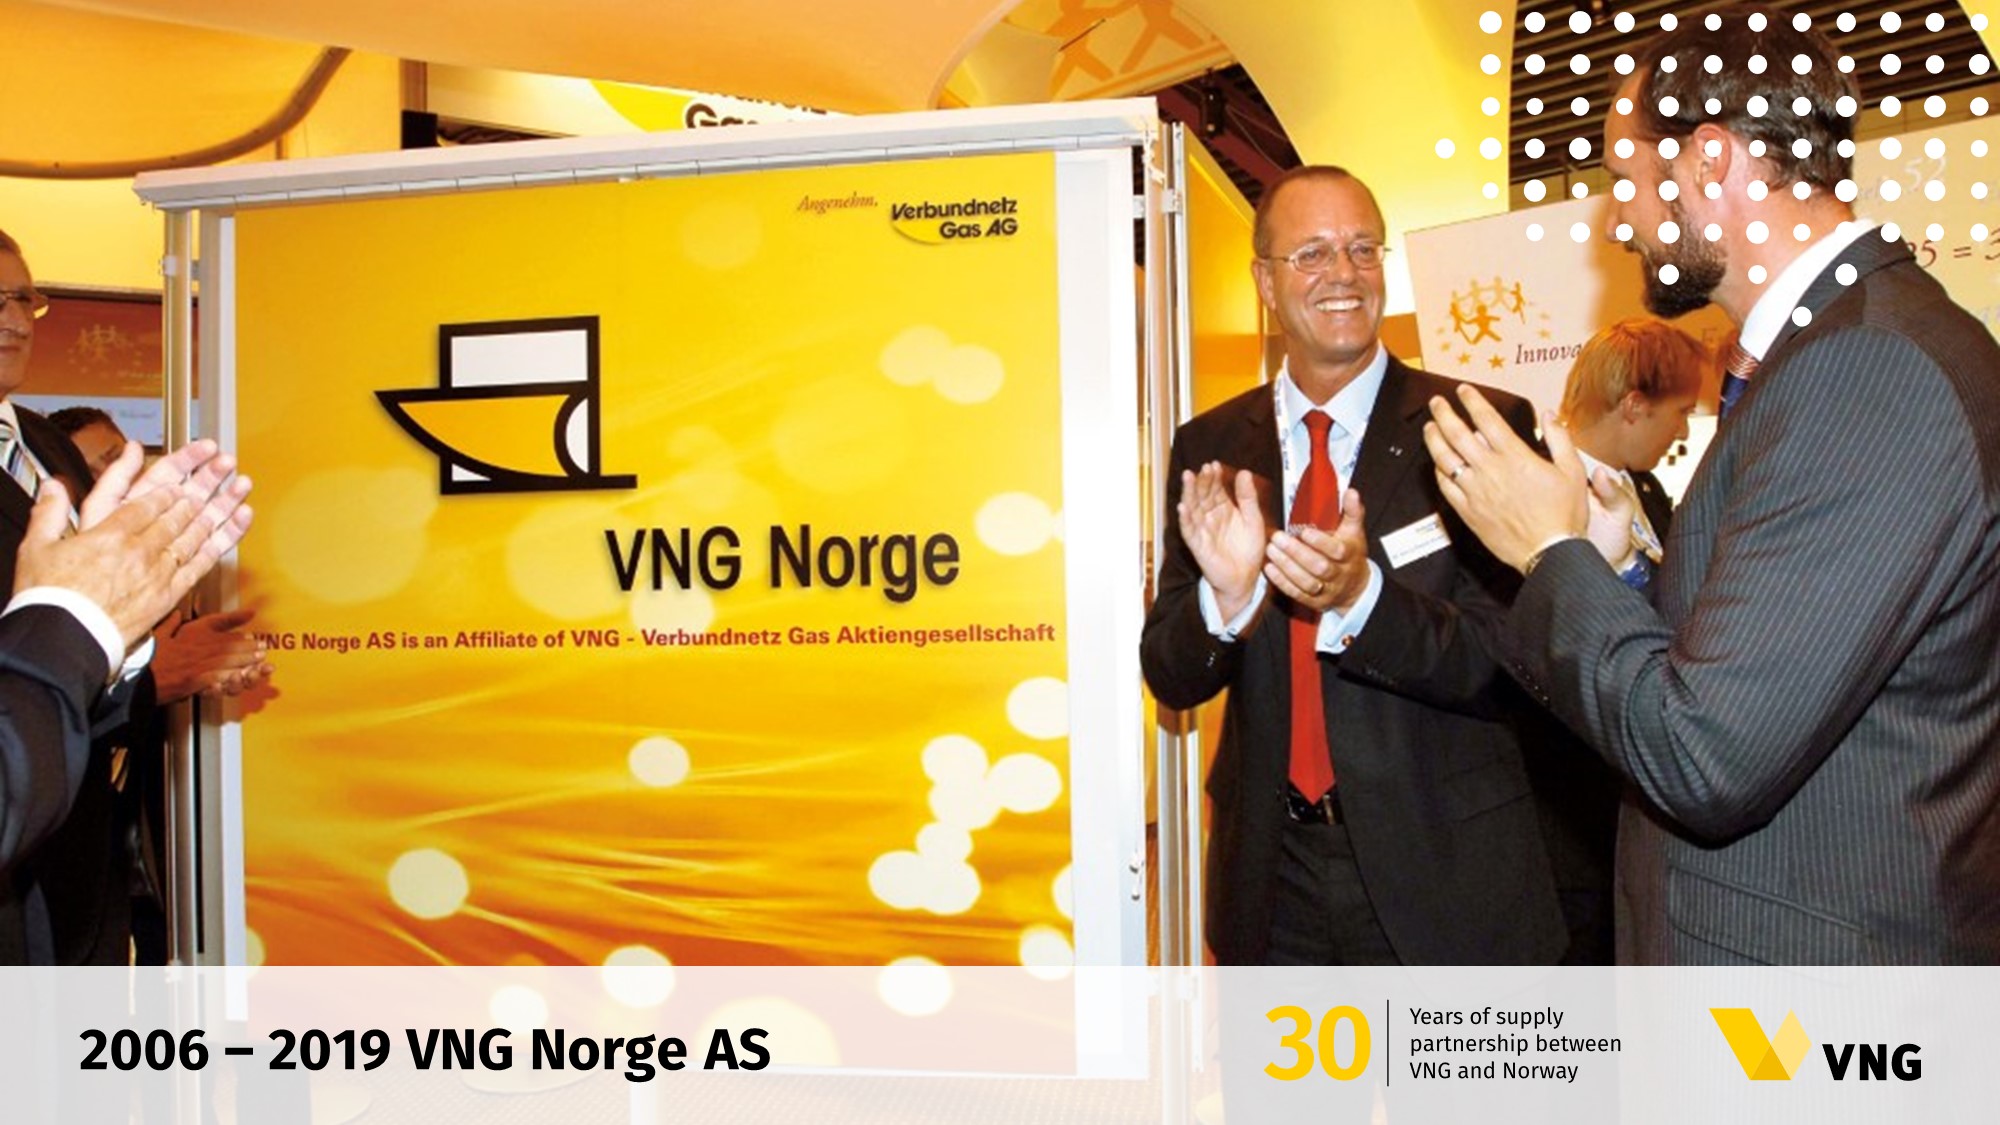 2006 – 2019 VNG Norge AS